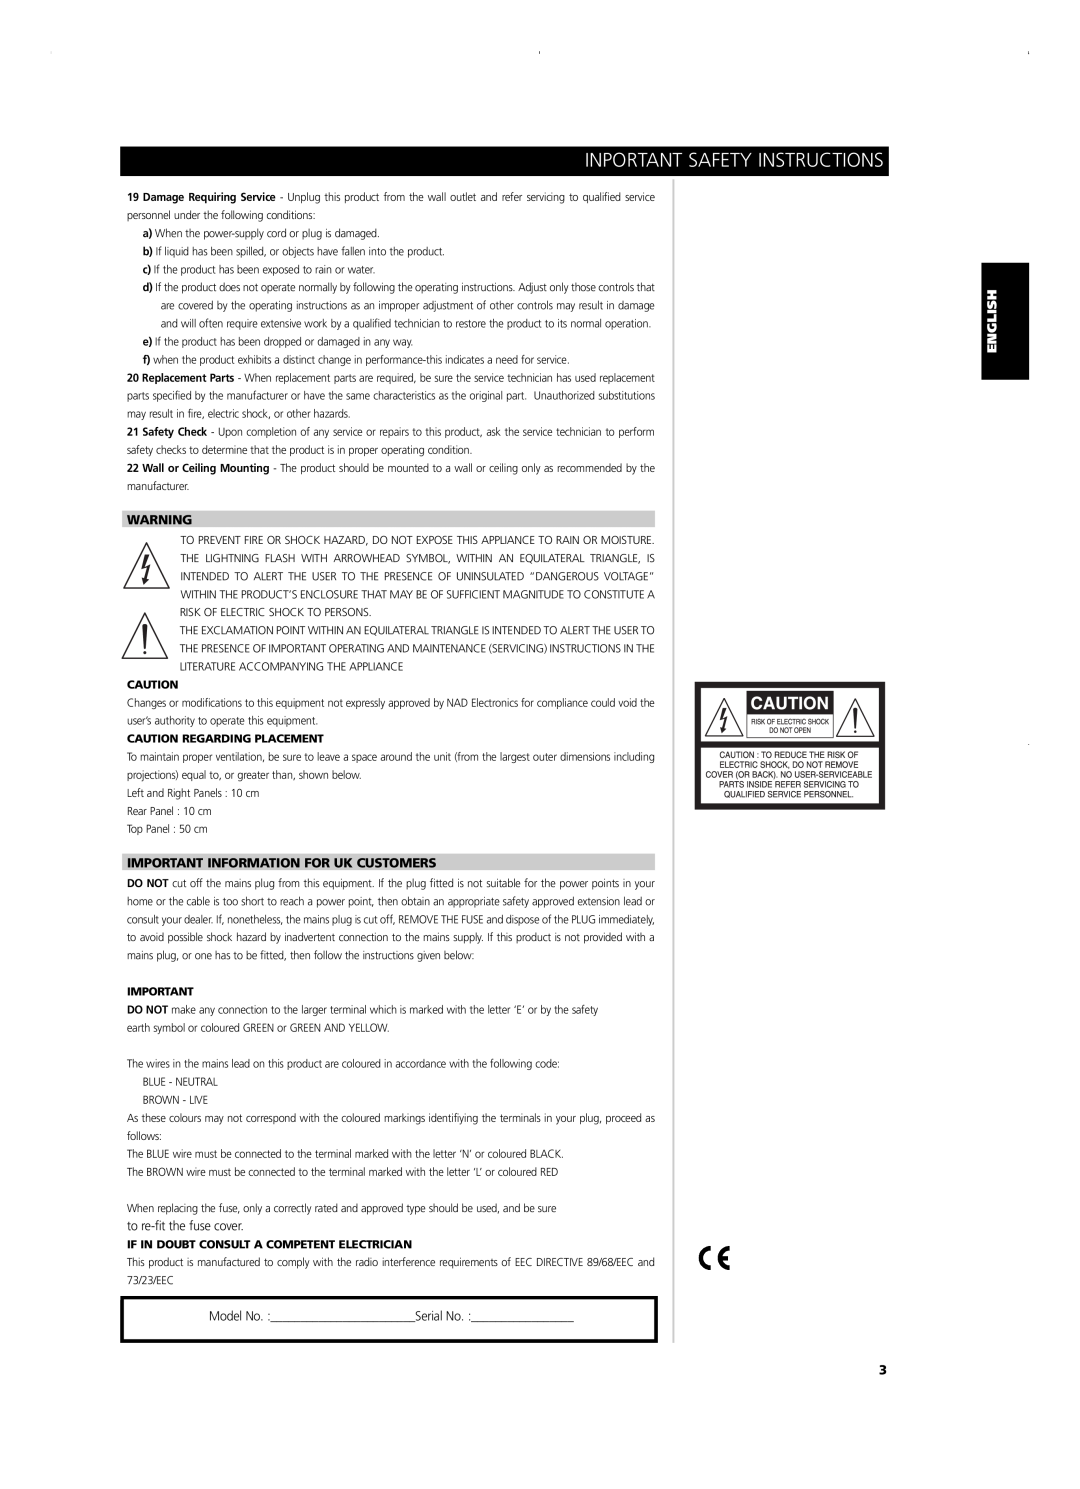 NAD C720BEE owner manual Inportant Safety Instructions, Important Information For Uk Customers, Caution Regarding Placement 